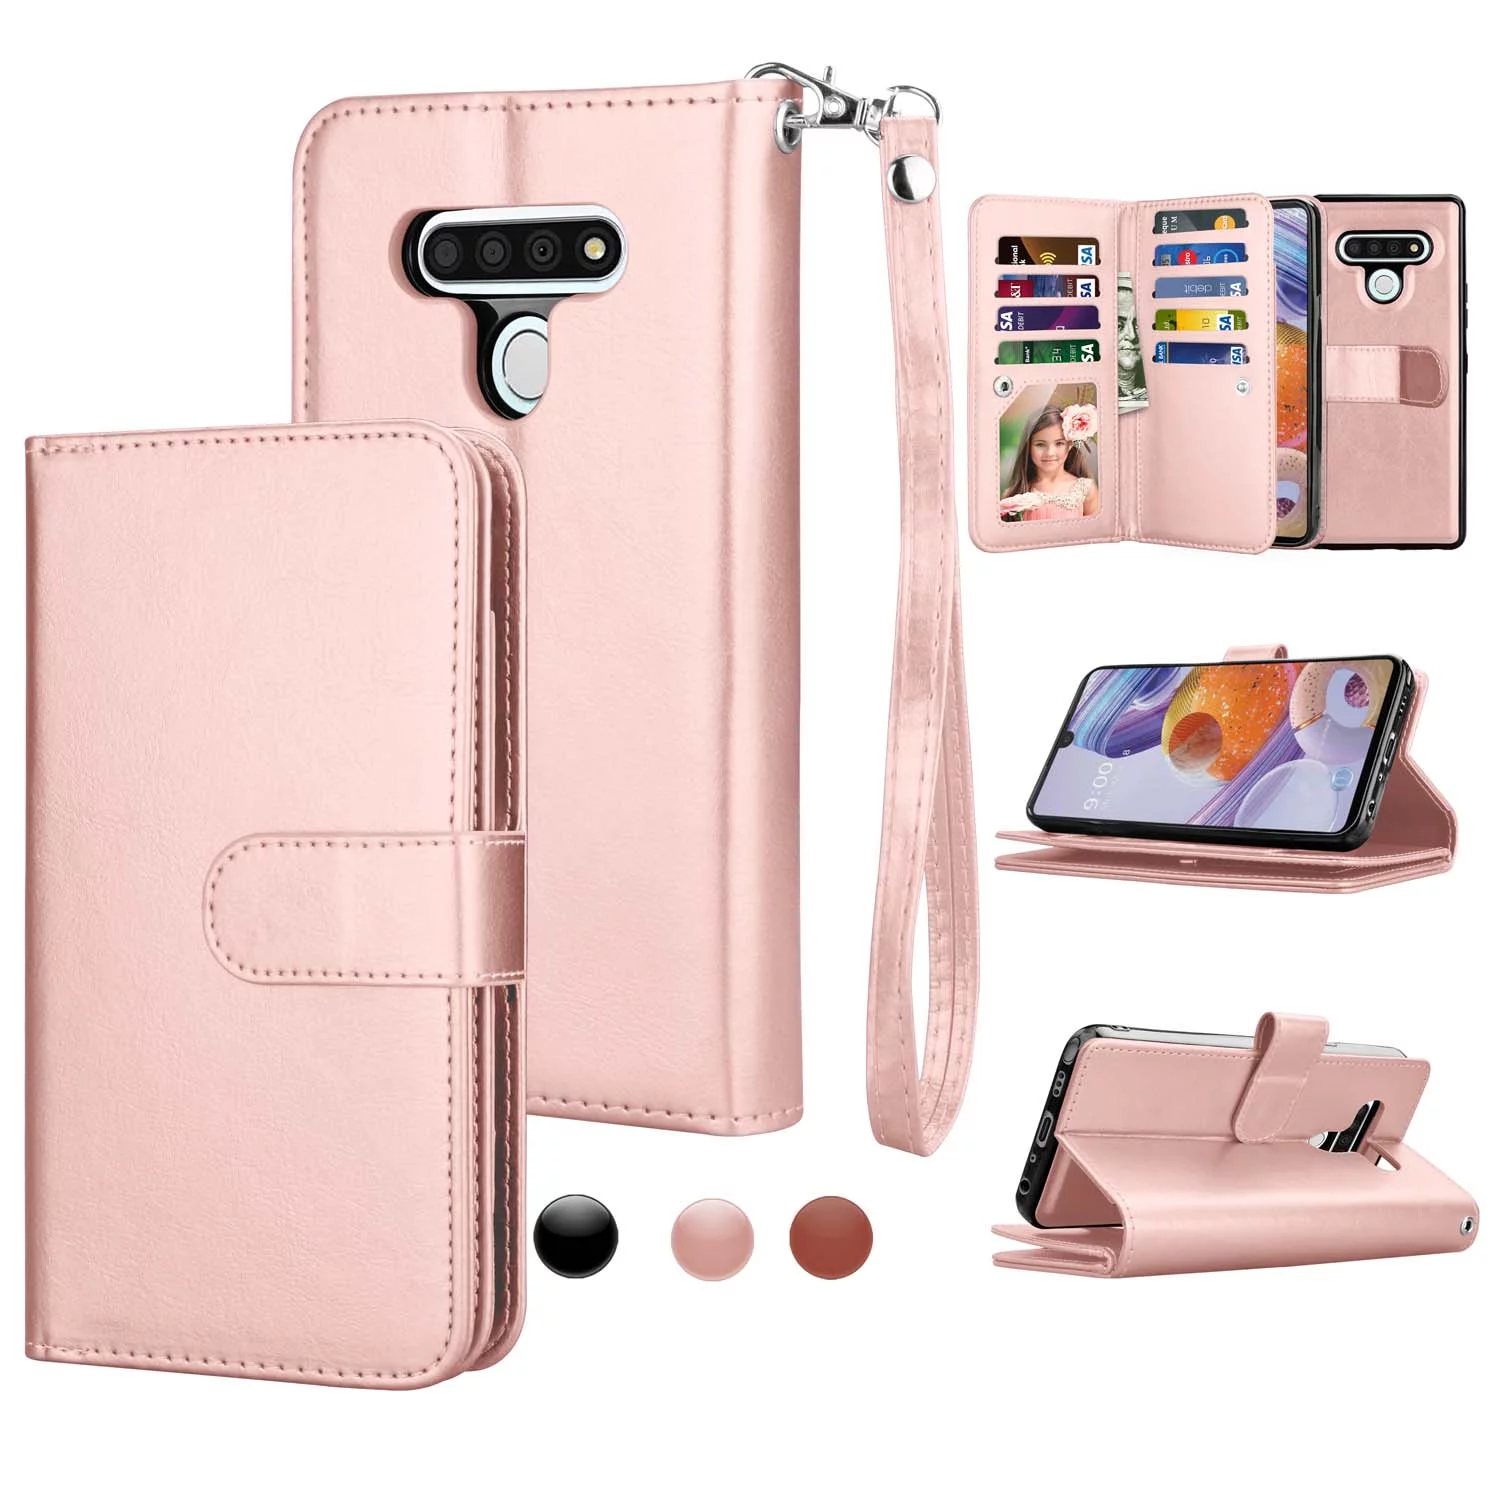 6.8" LG Stylo 6 Wallet Case, LG Stylo 6 PU Leather Case, Njjex Luxury PU Leather 9 Card Slots Holder Carrying Folio Flip Cover [Detachable Magnetic Hard Case] & Kickstand & Hand Strap -Rose Gold